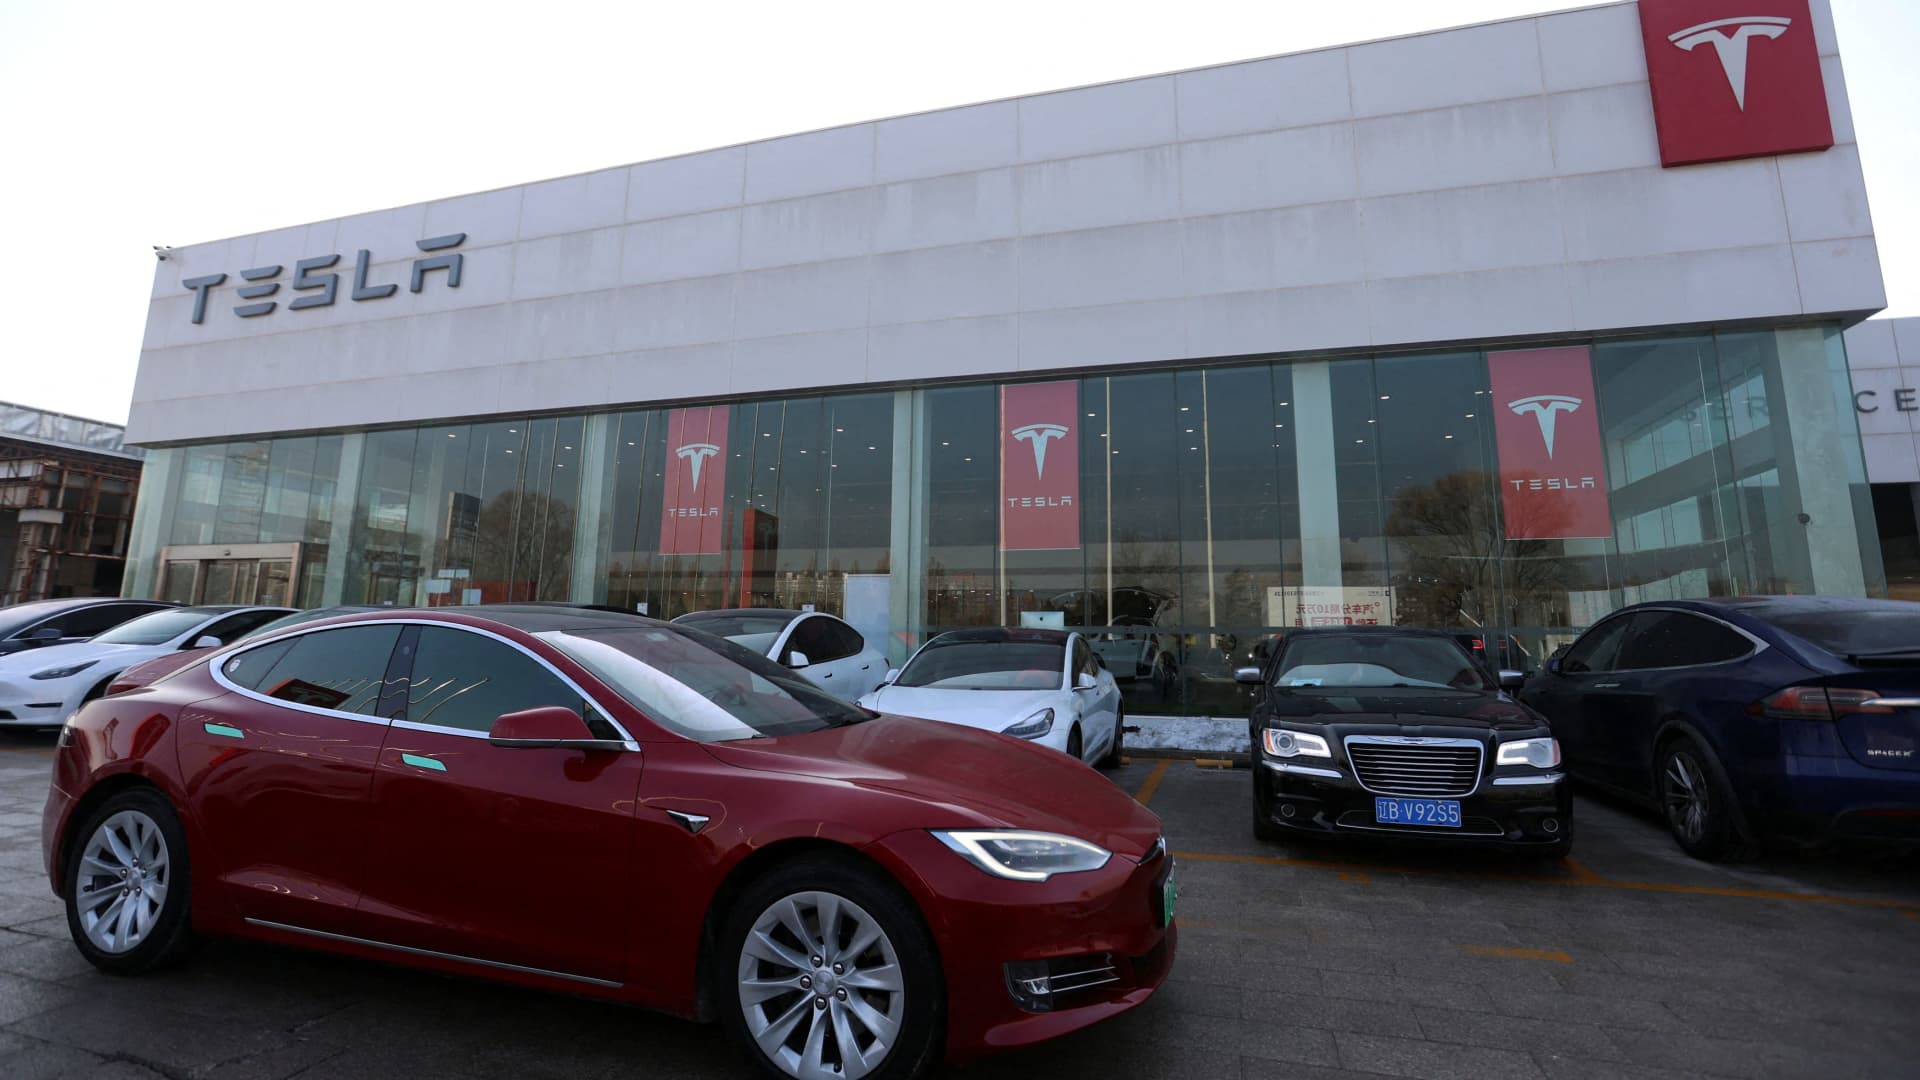 Tesla’s stock wraps up one of its worst quarters on record as global dominance wanes Auto Recent